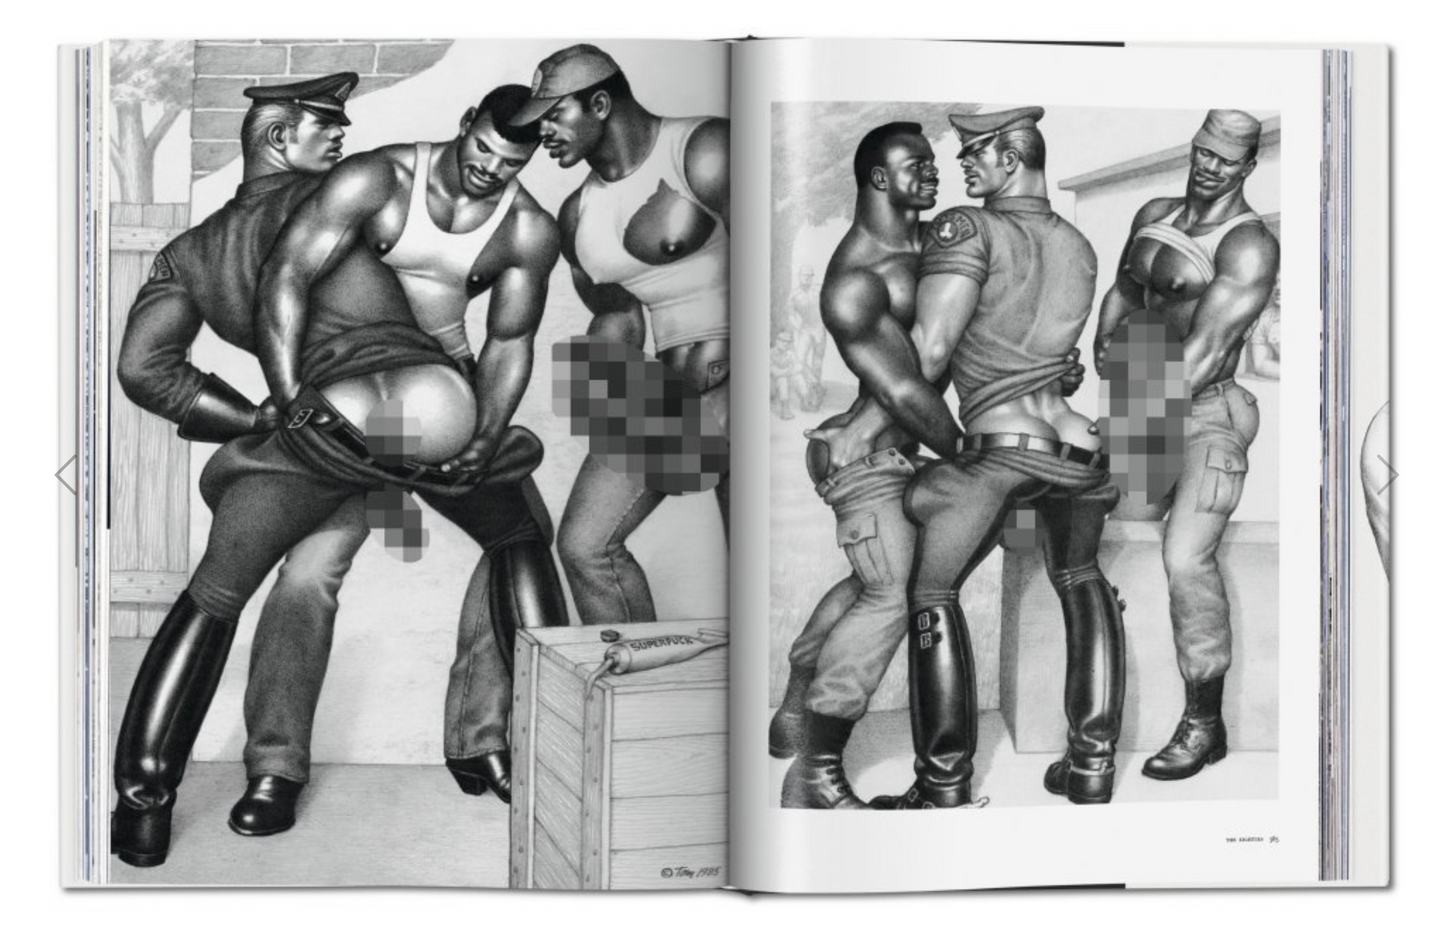 BOOK /  TOM OF FINLAND